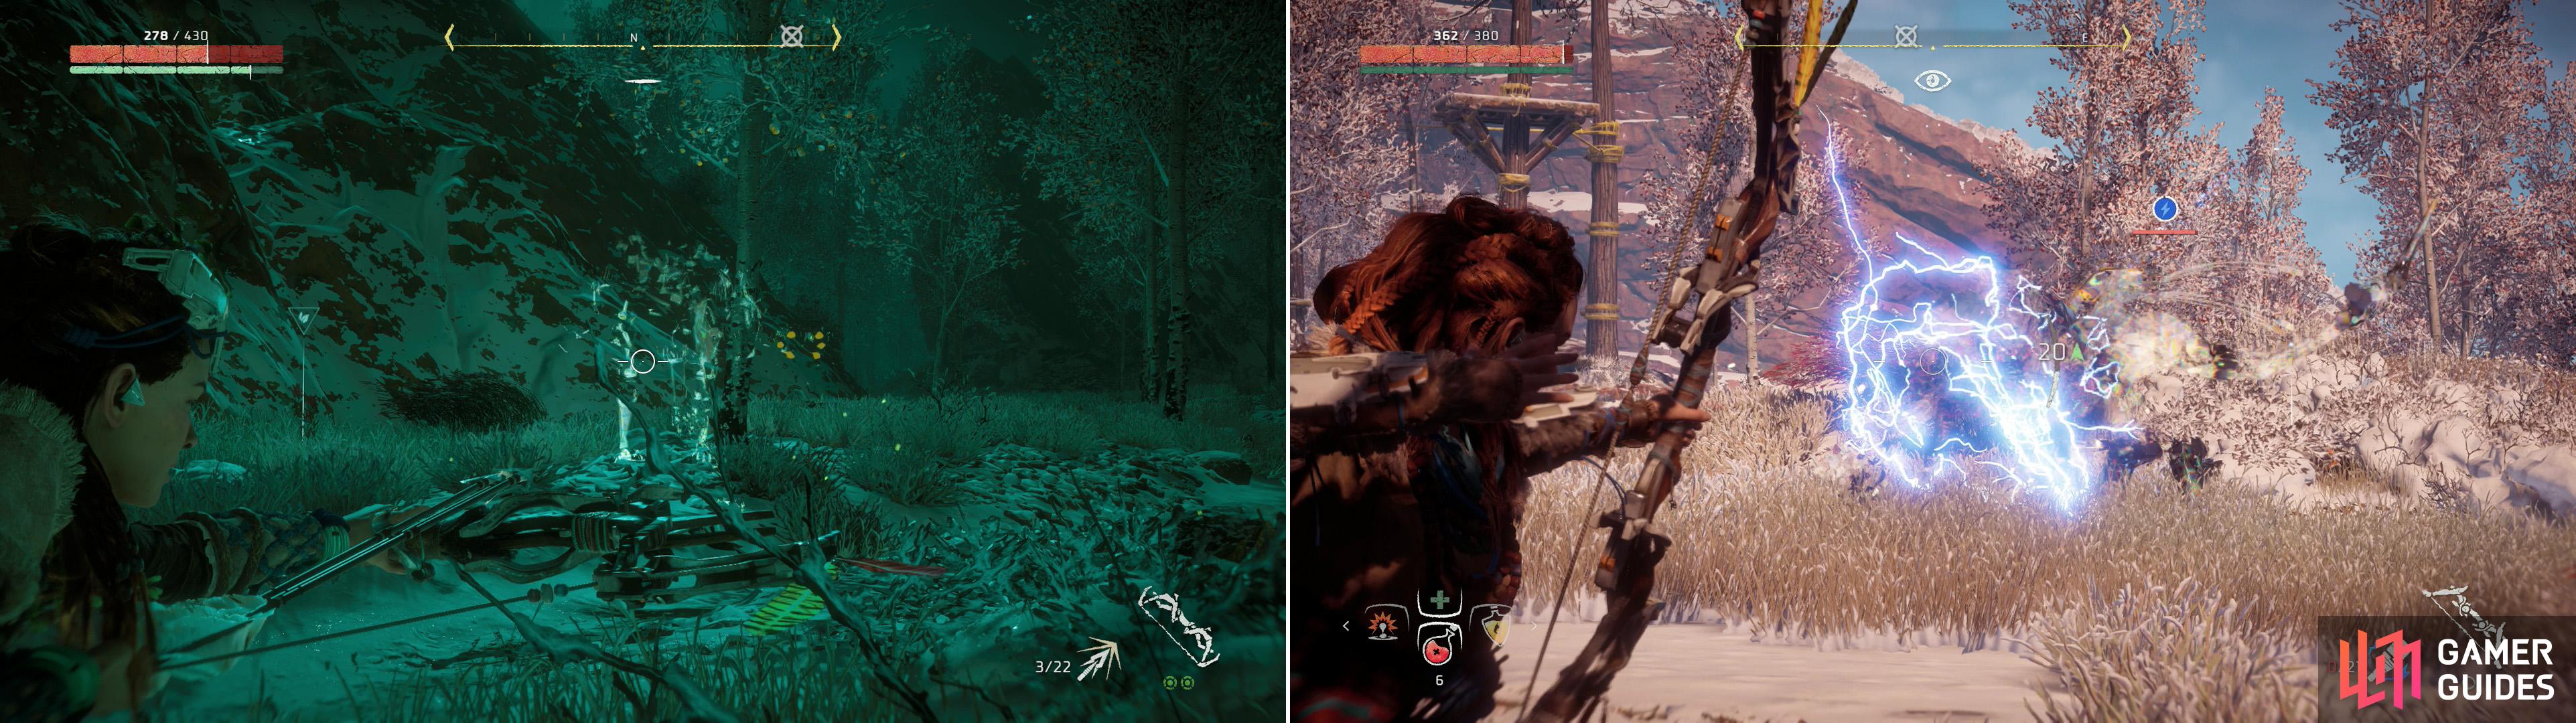 Before you can reacquire the stolen goods, a Stalker - a machine capable of stealth (left) will interfere. Like the Longleg, the Stalker is weak to Shock damage, too (right).